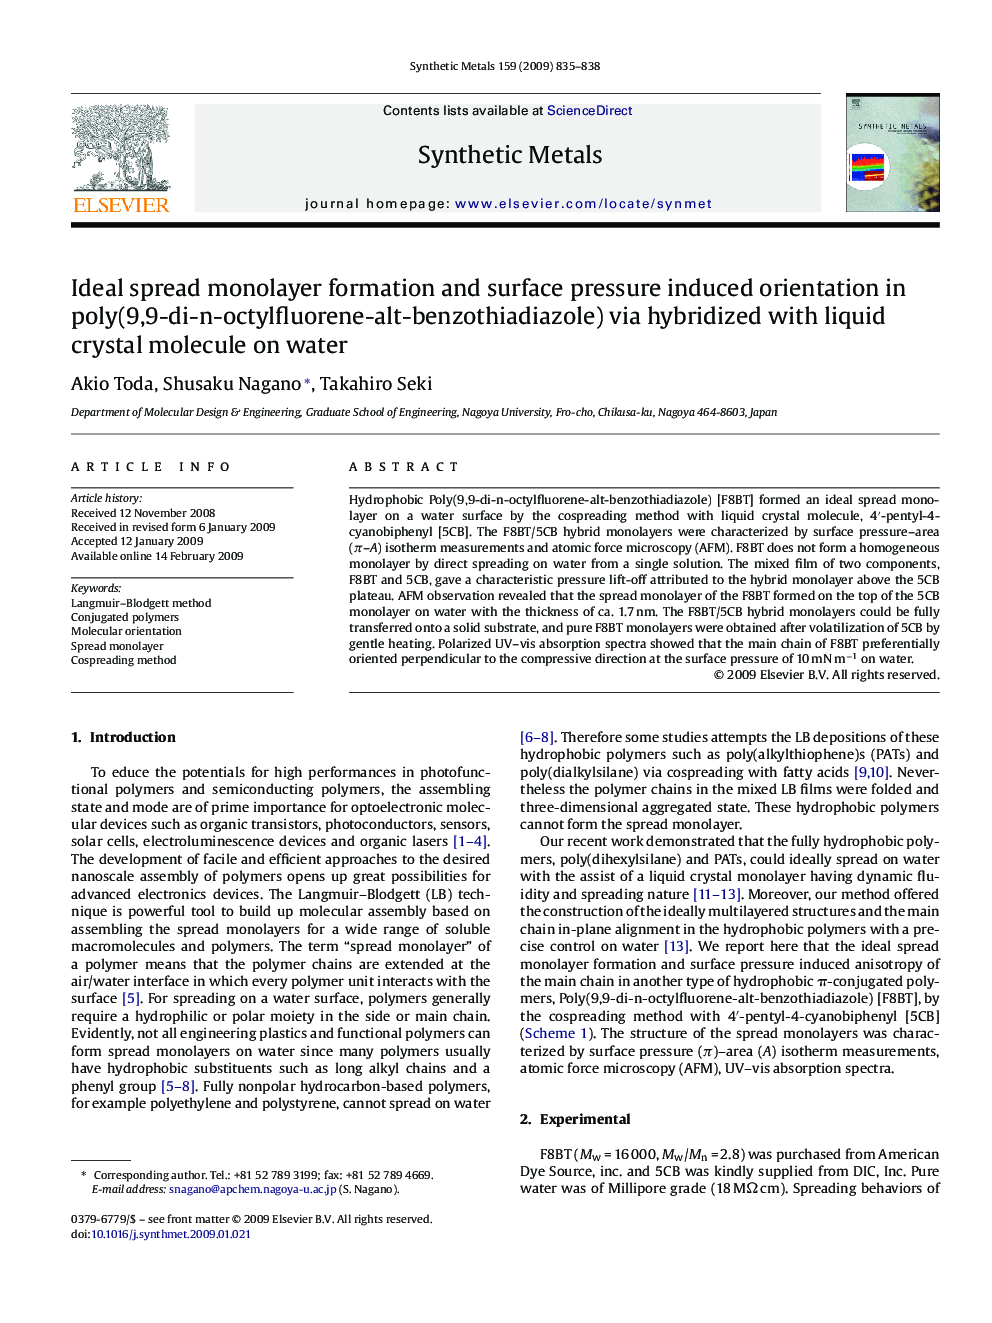 Ideal spread monolayer formation and surface pressure induced orientation in poly(9,9-di-n-octylfluorene-alt-benzothiadiazole) via hybridized with liquid crystal molecule on water